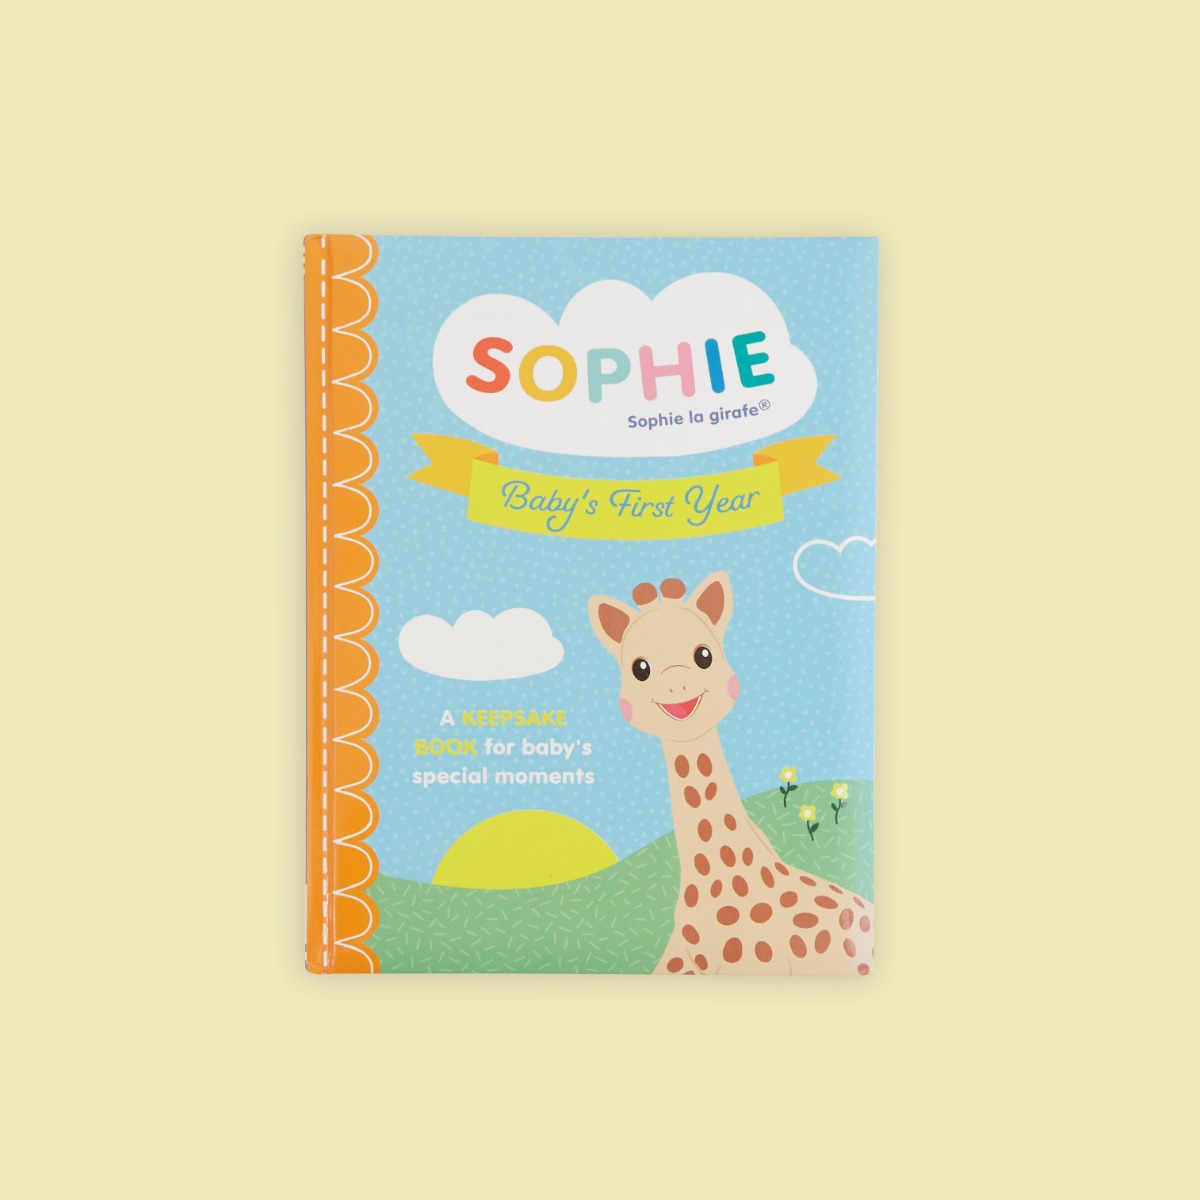 Personalised Sophie la girafe: Baby's First Year: A Keepsake Book for Baby's Special Moments